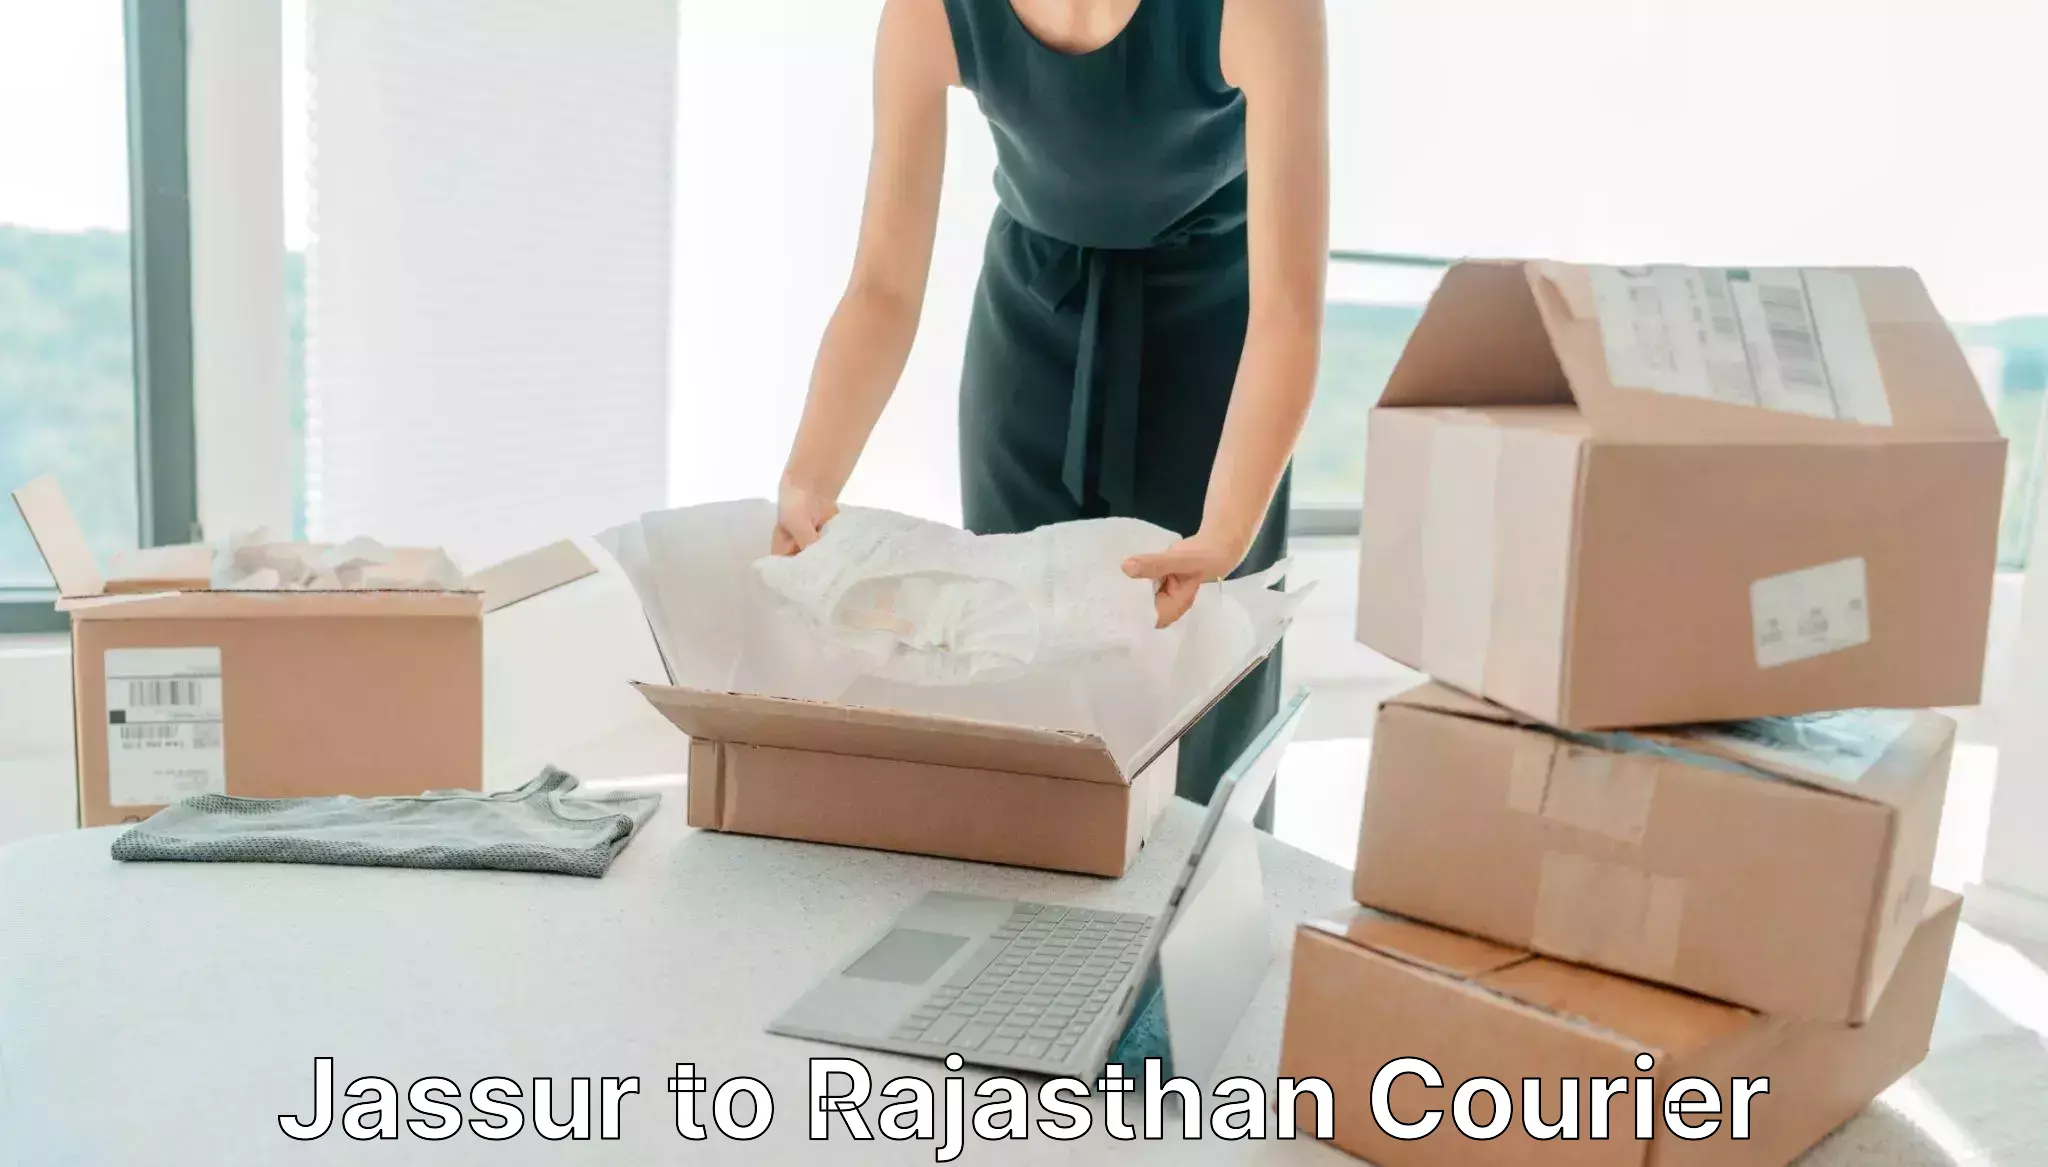 Subscription-based courier Jassur to Rajasthan